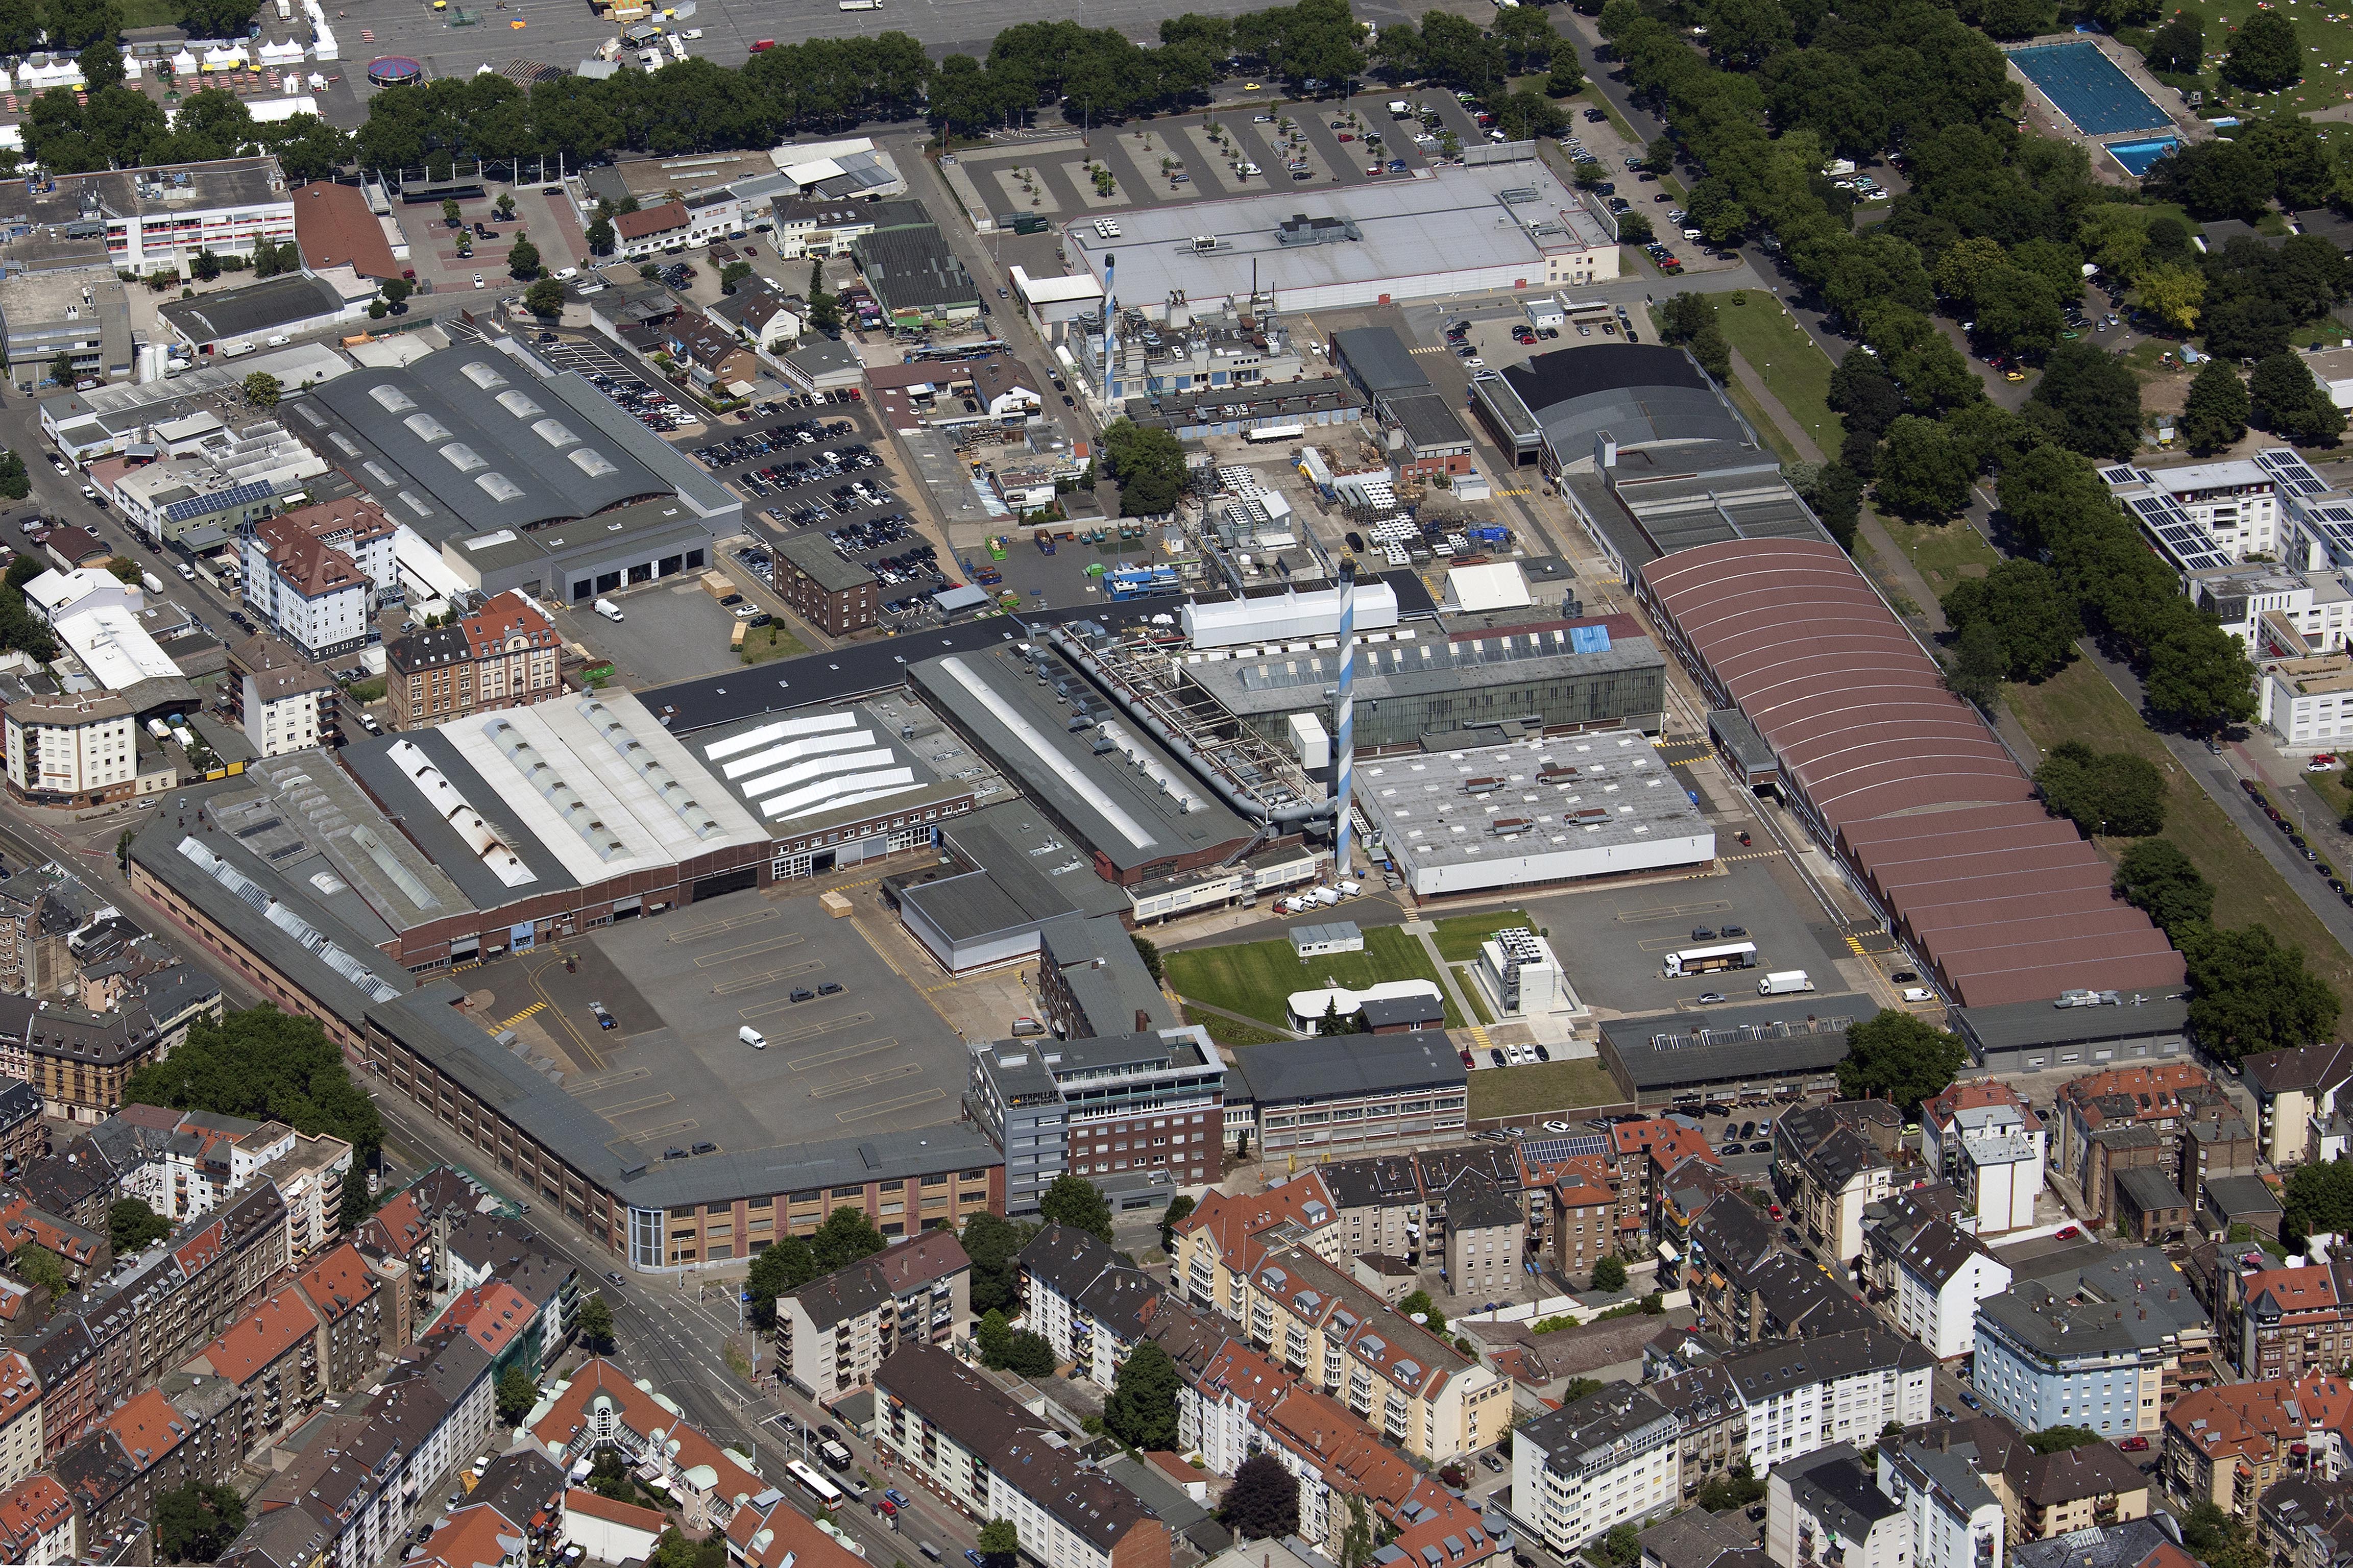 Caterpillar Energy Solutions is headquartered in the historic city of Mannheim